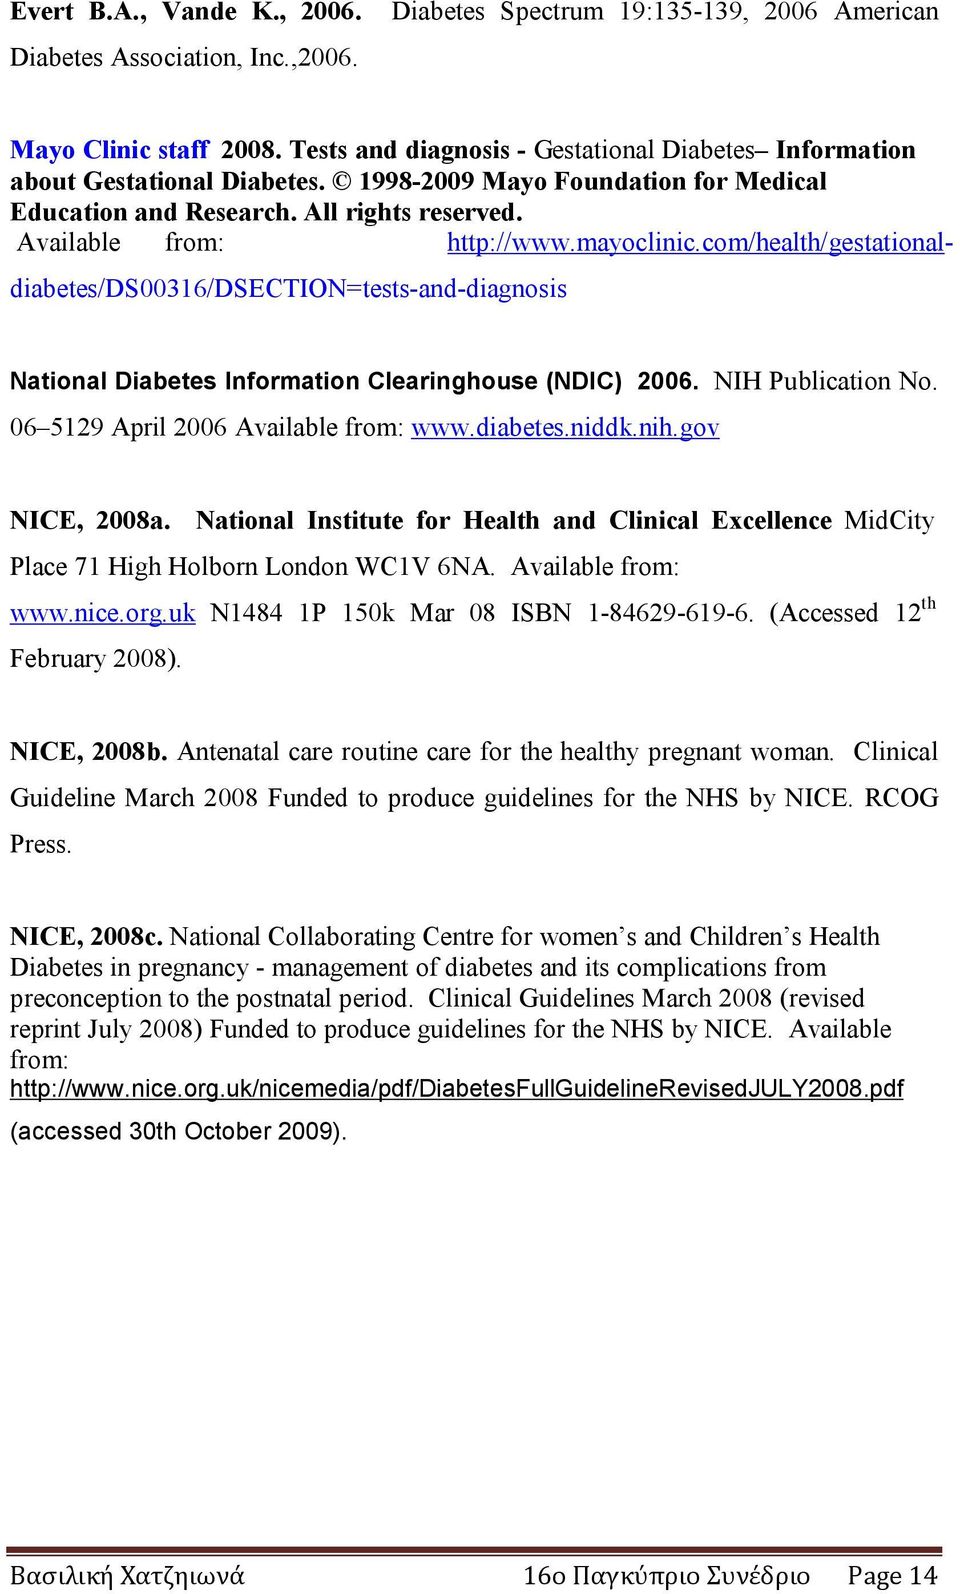 mayoclinic.com/health/gestationaldiabetes/ds00316/dsection=tests-and-diagnosis National Diabetes Information Clearinghouse (NDIC) 2006. NIH Publication No. 06 5129 April 2006 Available from: www.